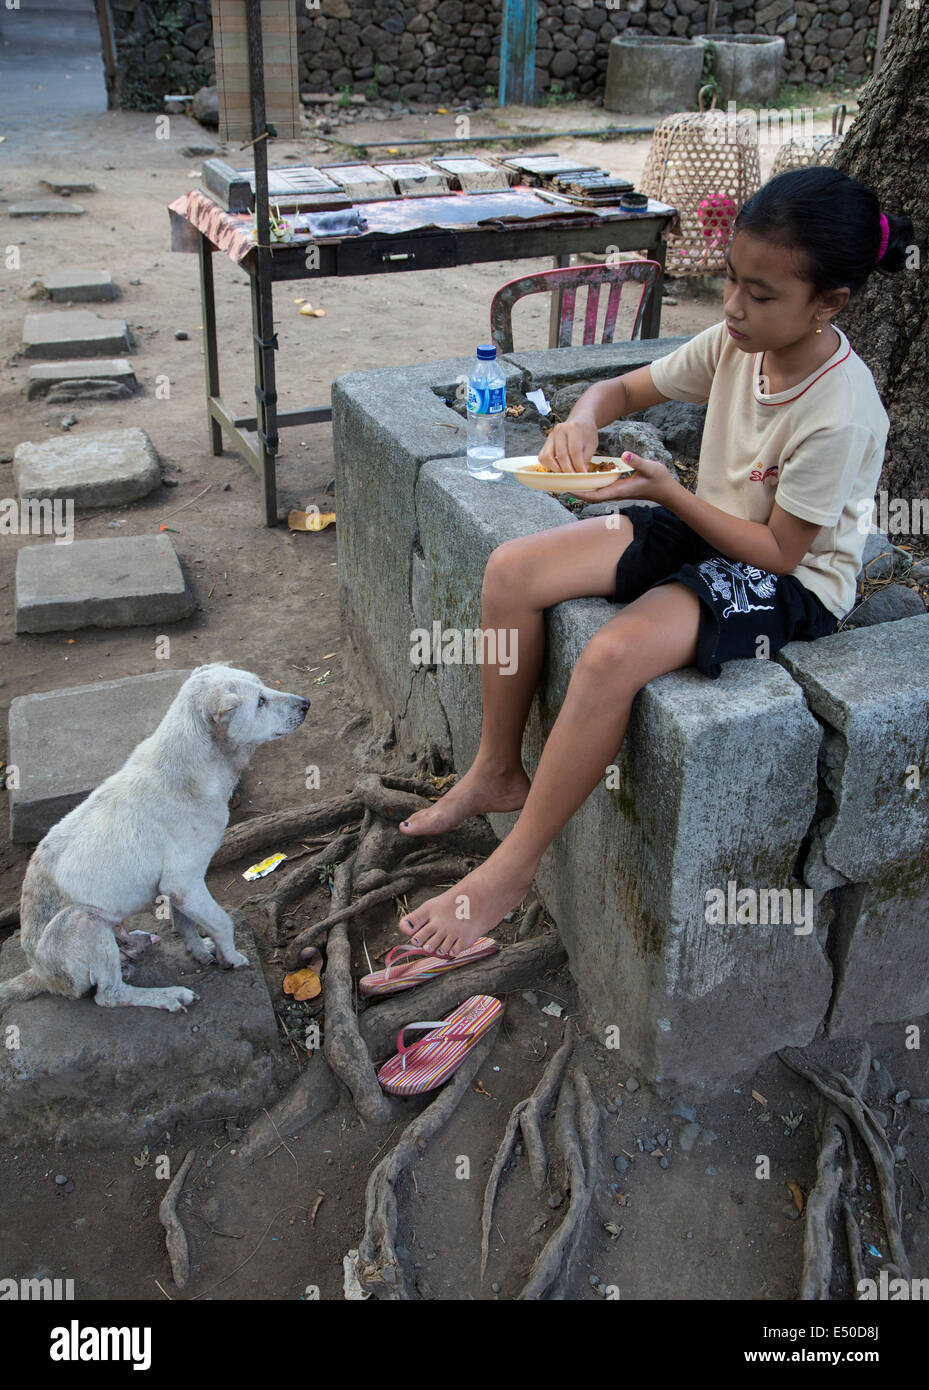 Bali, Indonesia.   Young Girl Eating Lunch while her Pet Dog Looks On.  Tenganan Village. Stock Photo